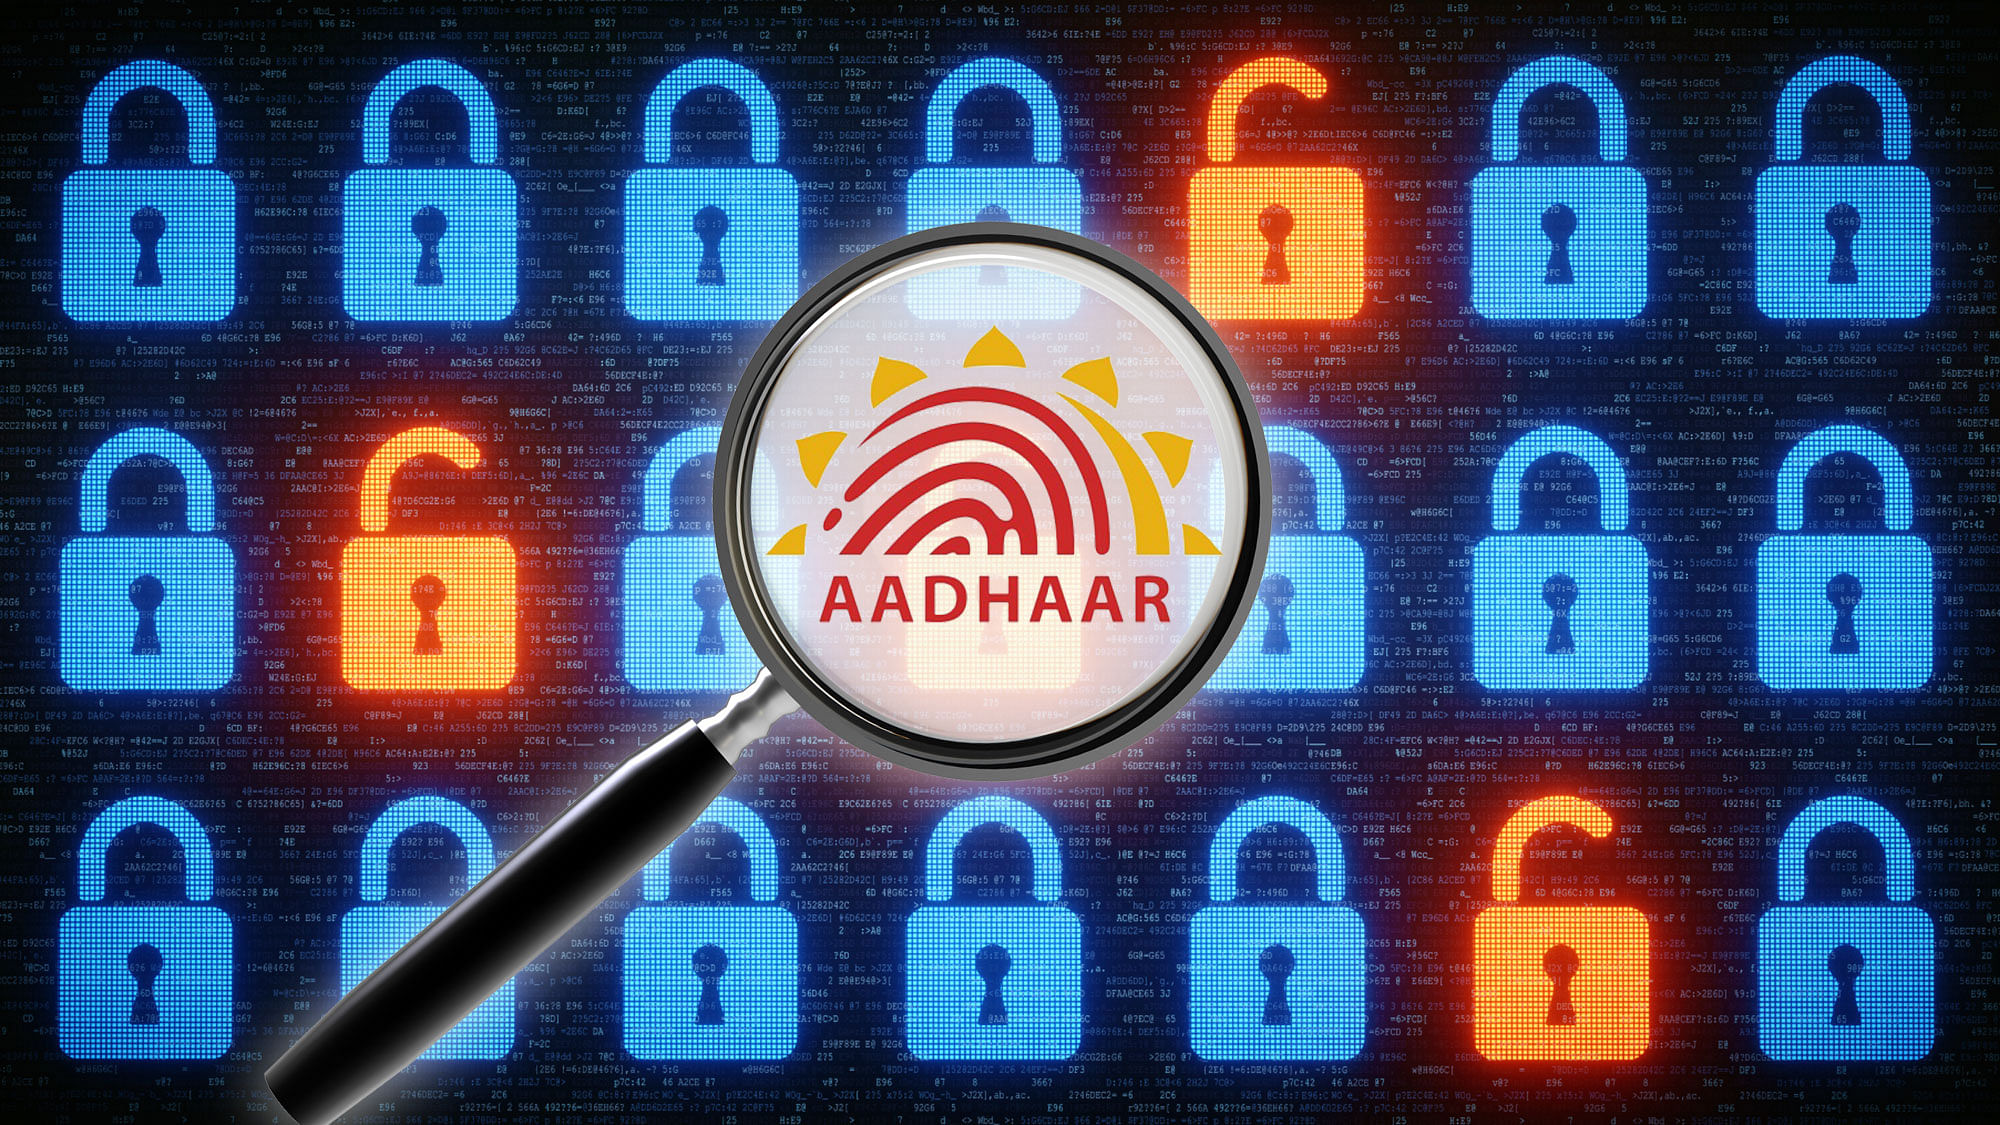 The accused allegedly changed Aadhaar details for Rs 300.